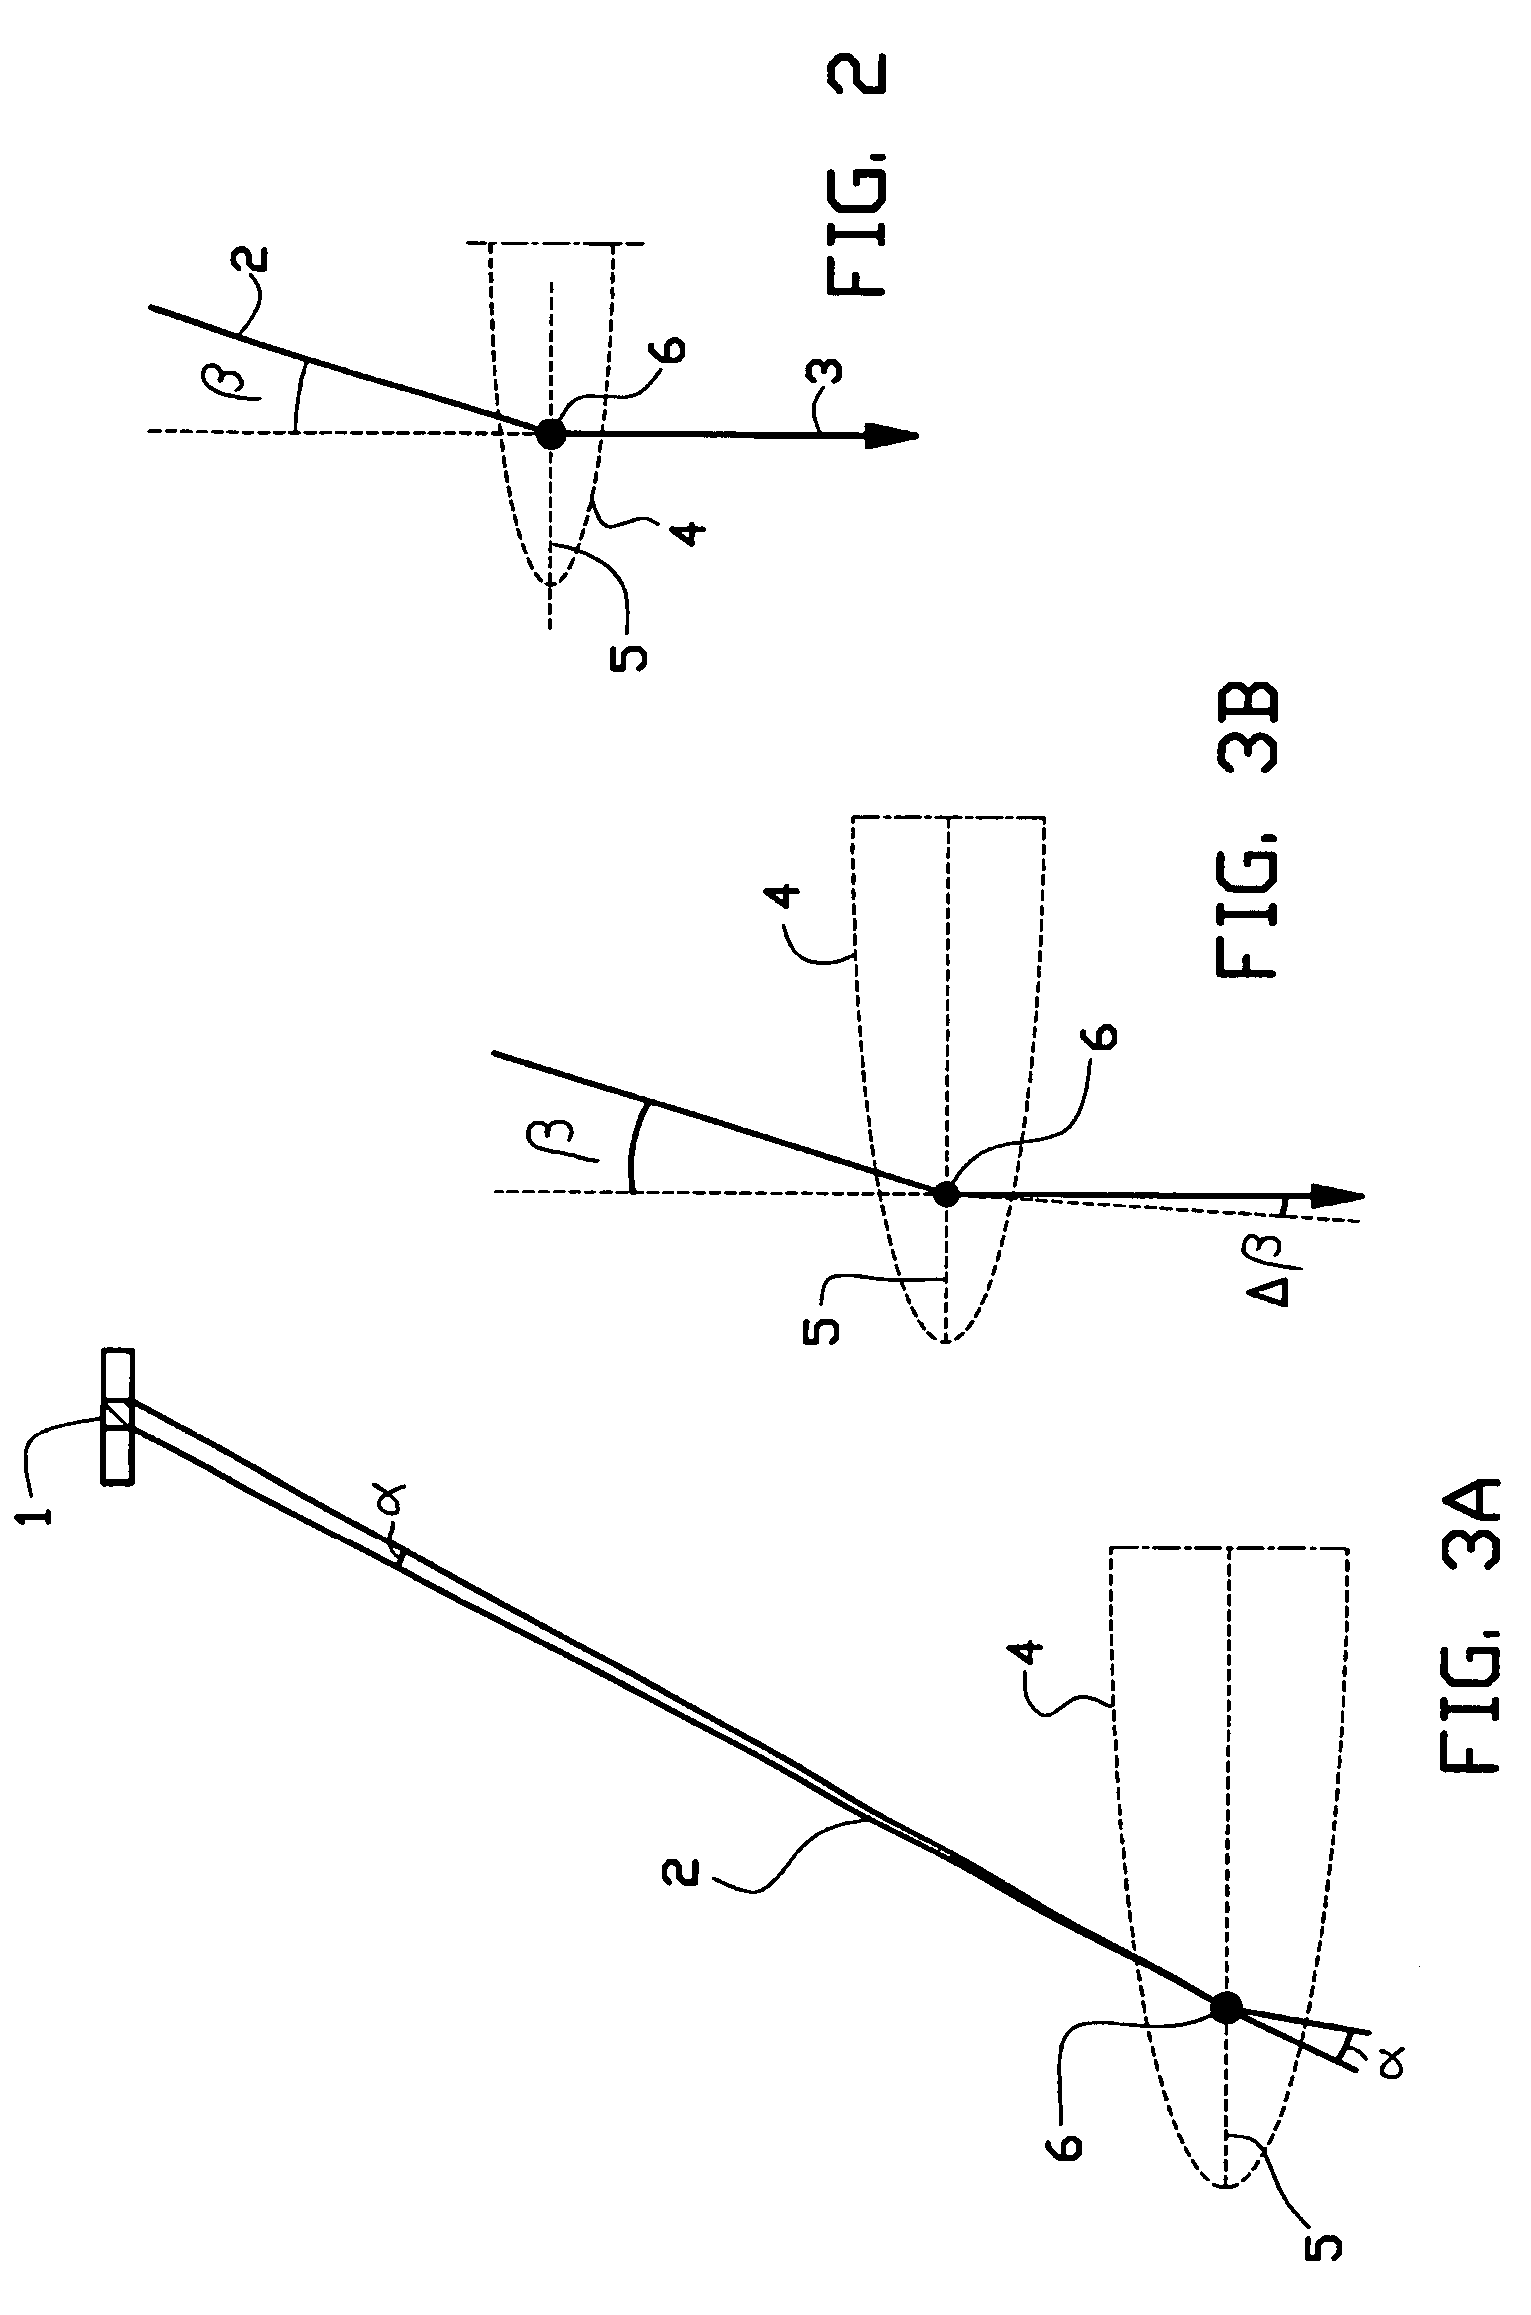 Apparatus for generating a plurality of beamlets